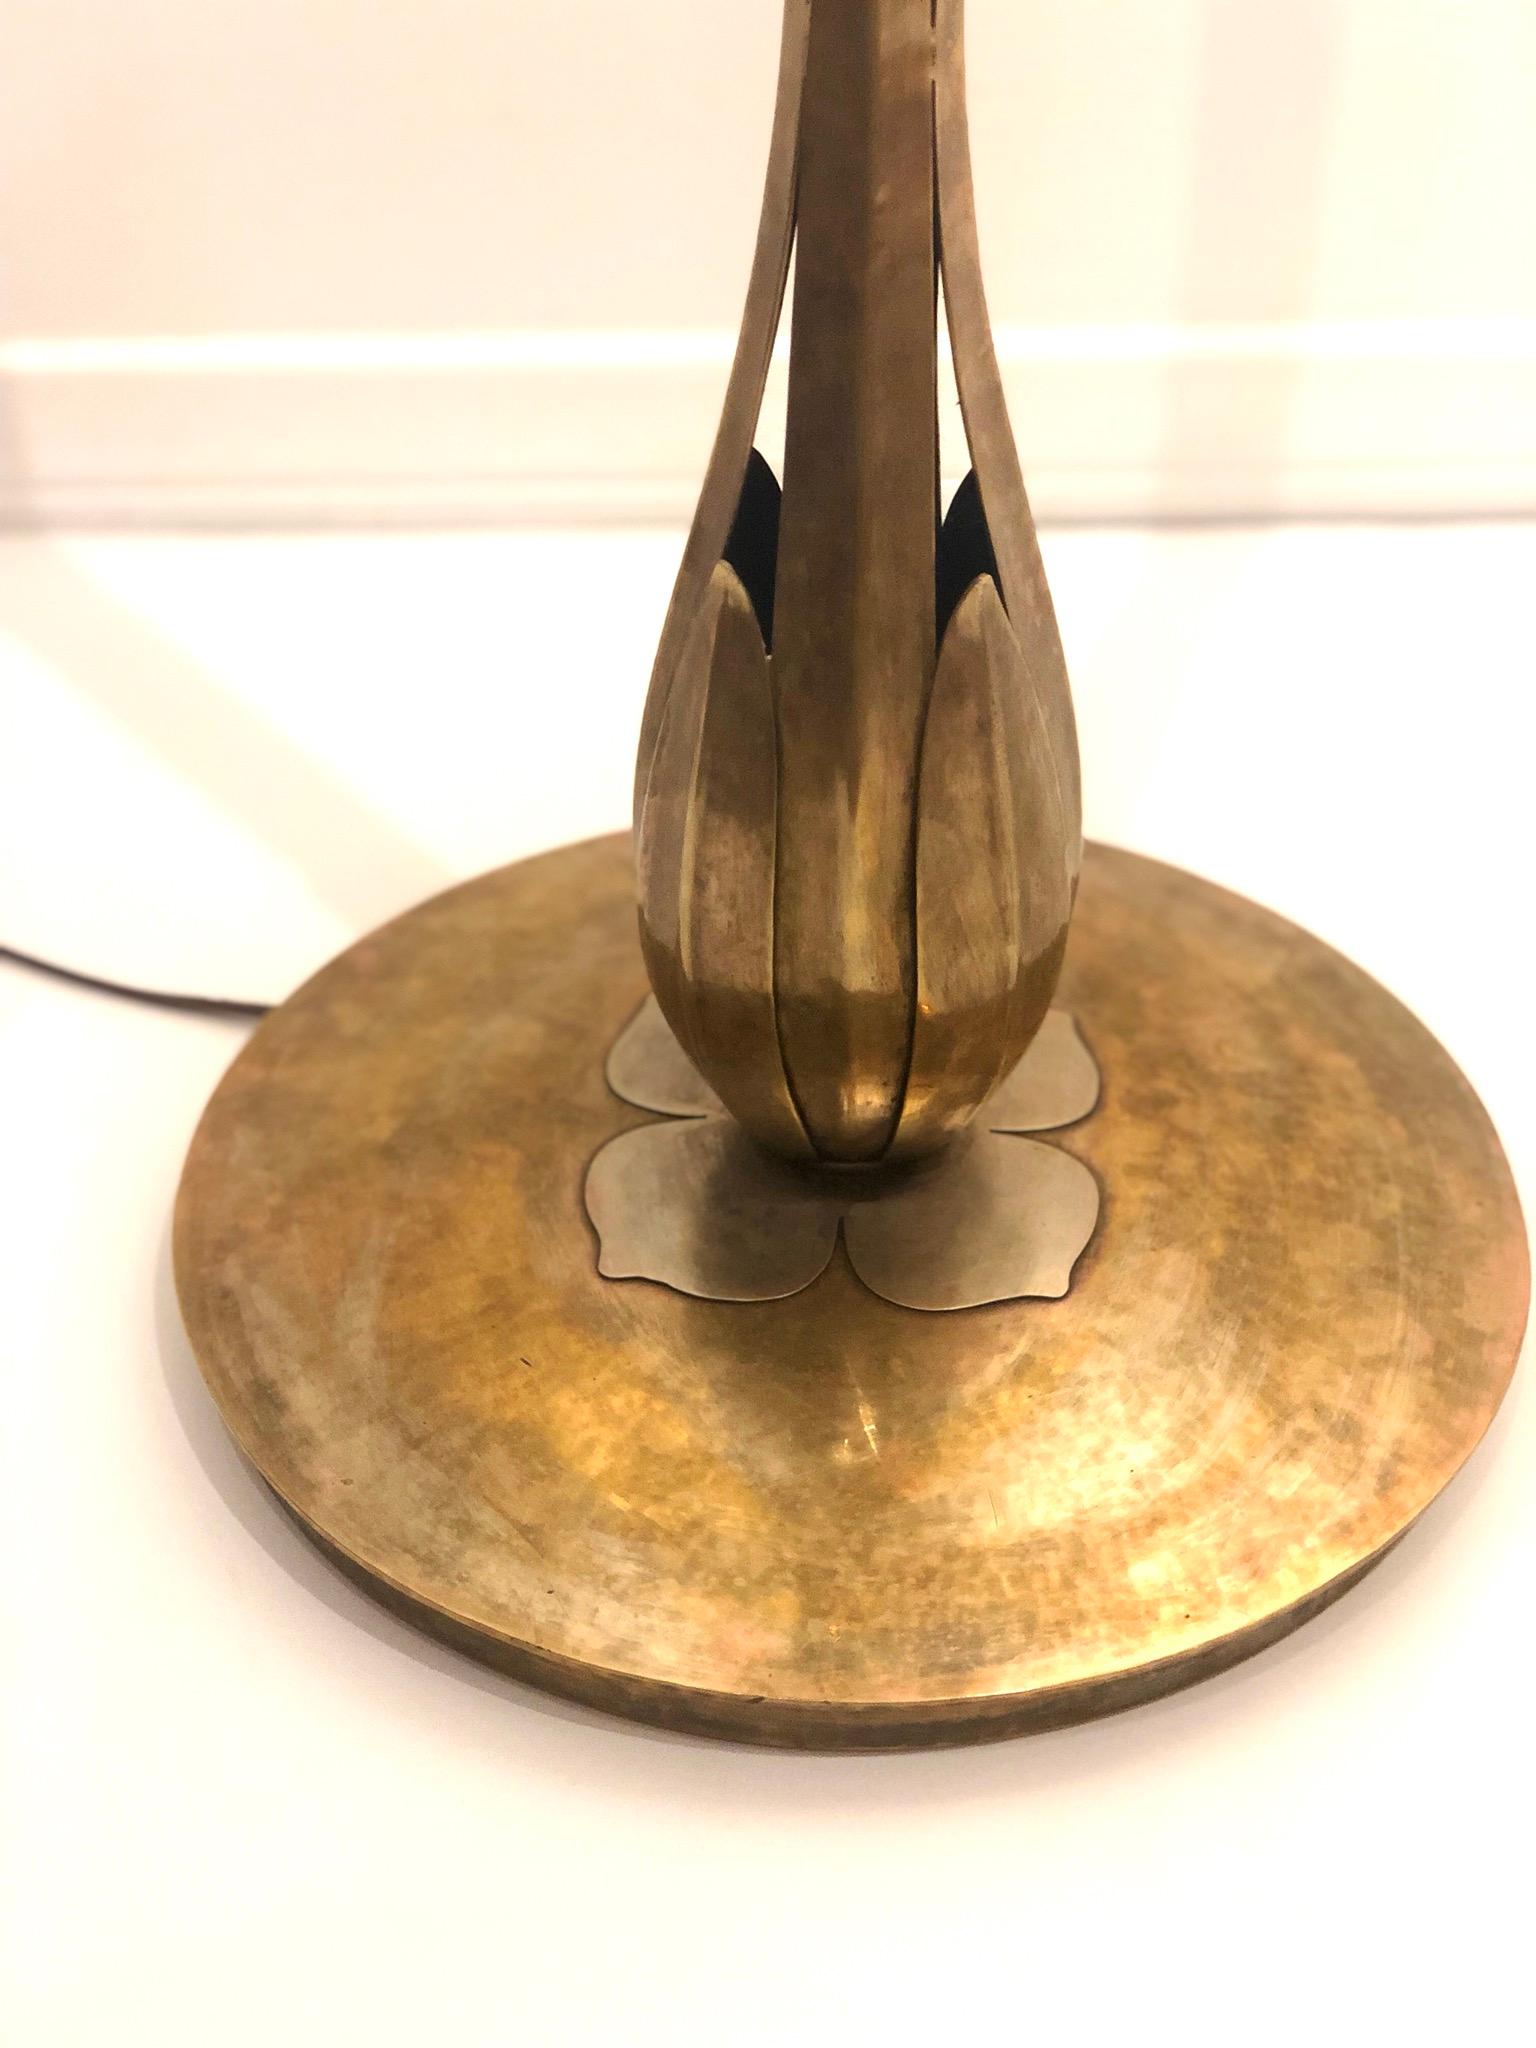 Handmade torchiere by Norman Grag of Grag Studios designed especially for Gumps in San Francisco. Brass patina finish with mixed metal accents. The lamp has been rewired and comes with a push off / on switch lightly polished and cleaned stamped at